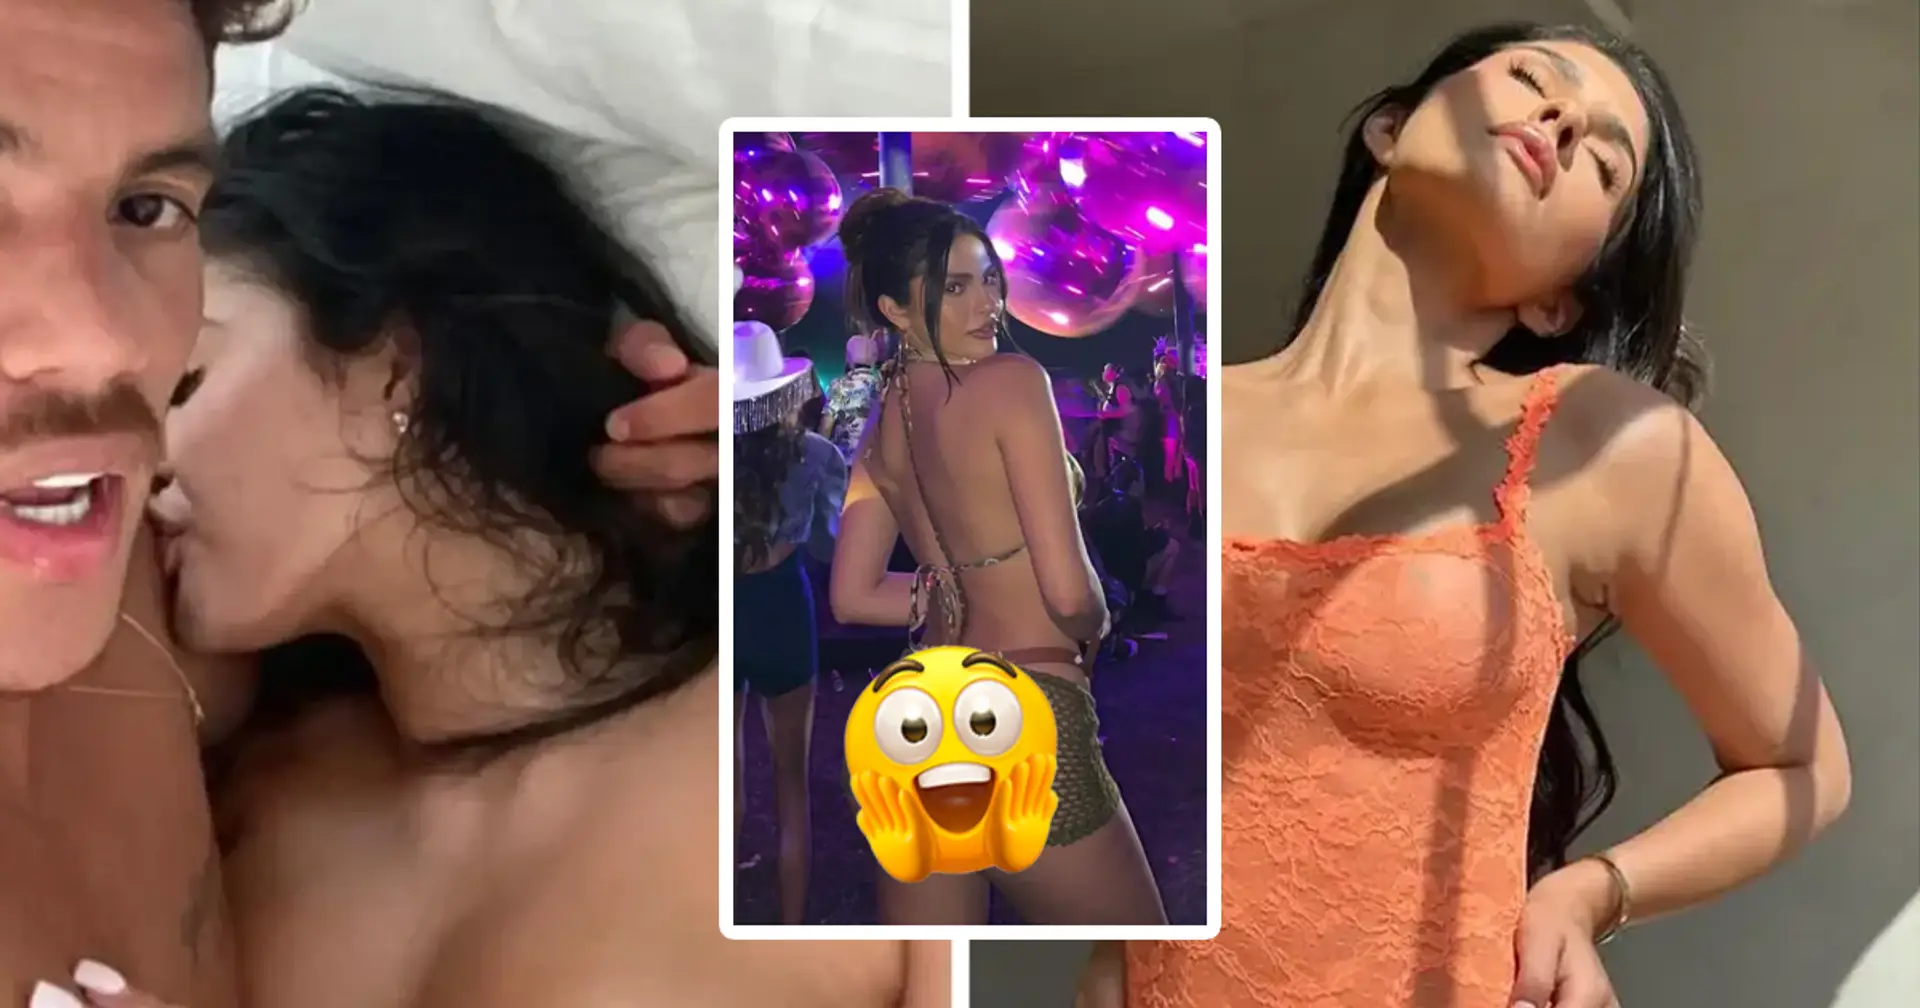 Barcelona ex-player lit up a 'spicy' photo of his girlfriend in his stories – now she is popular in OnlyFans